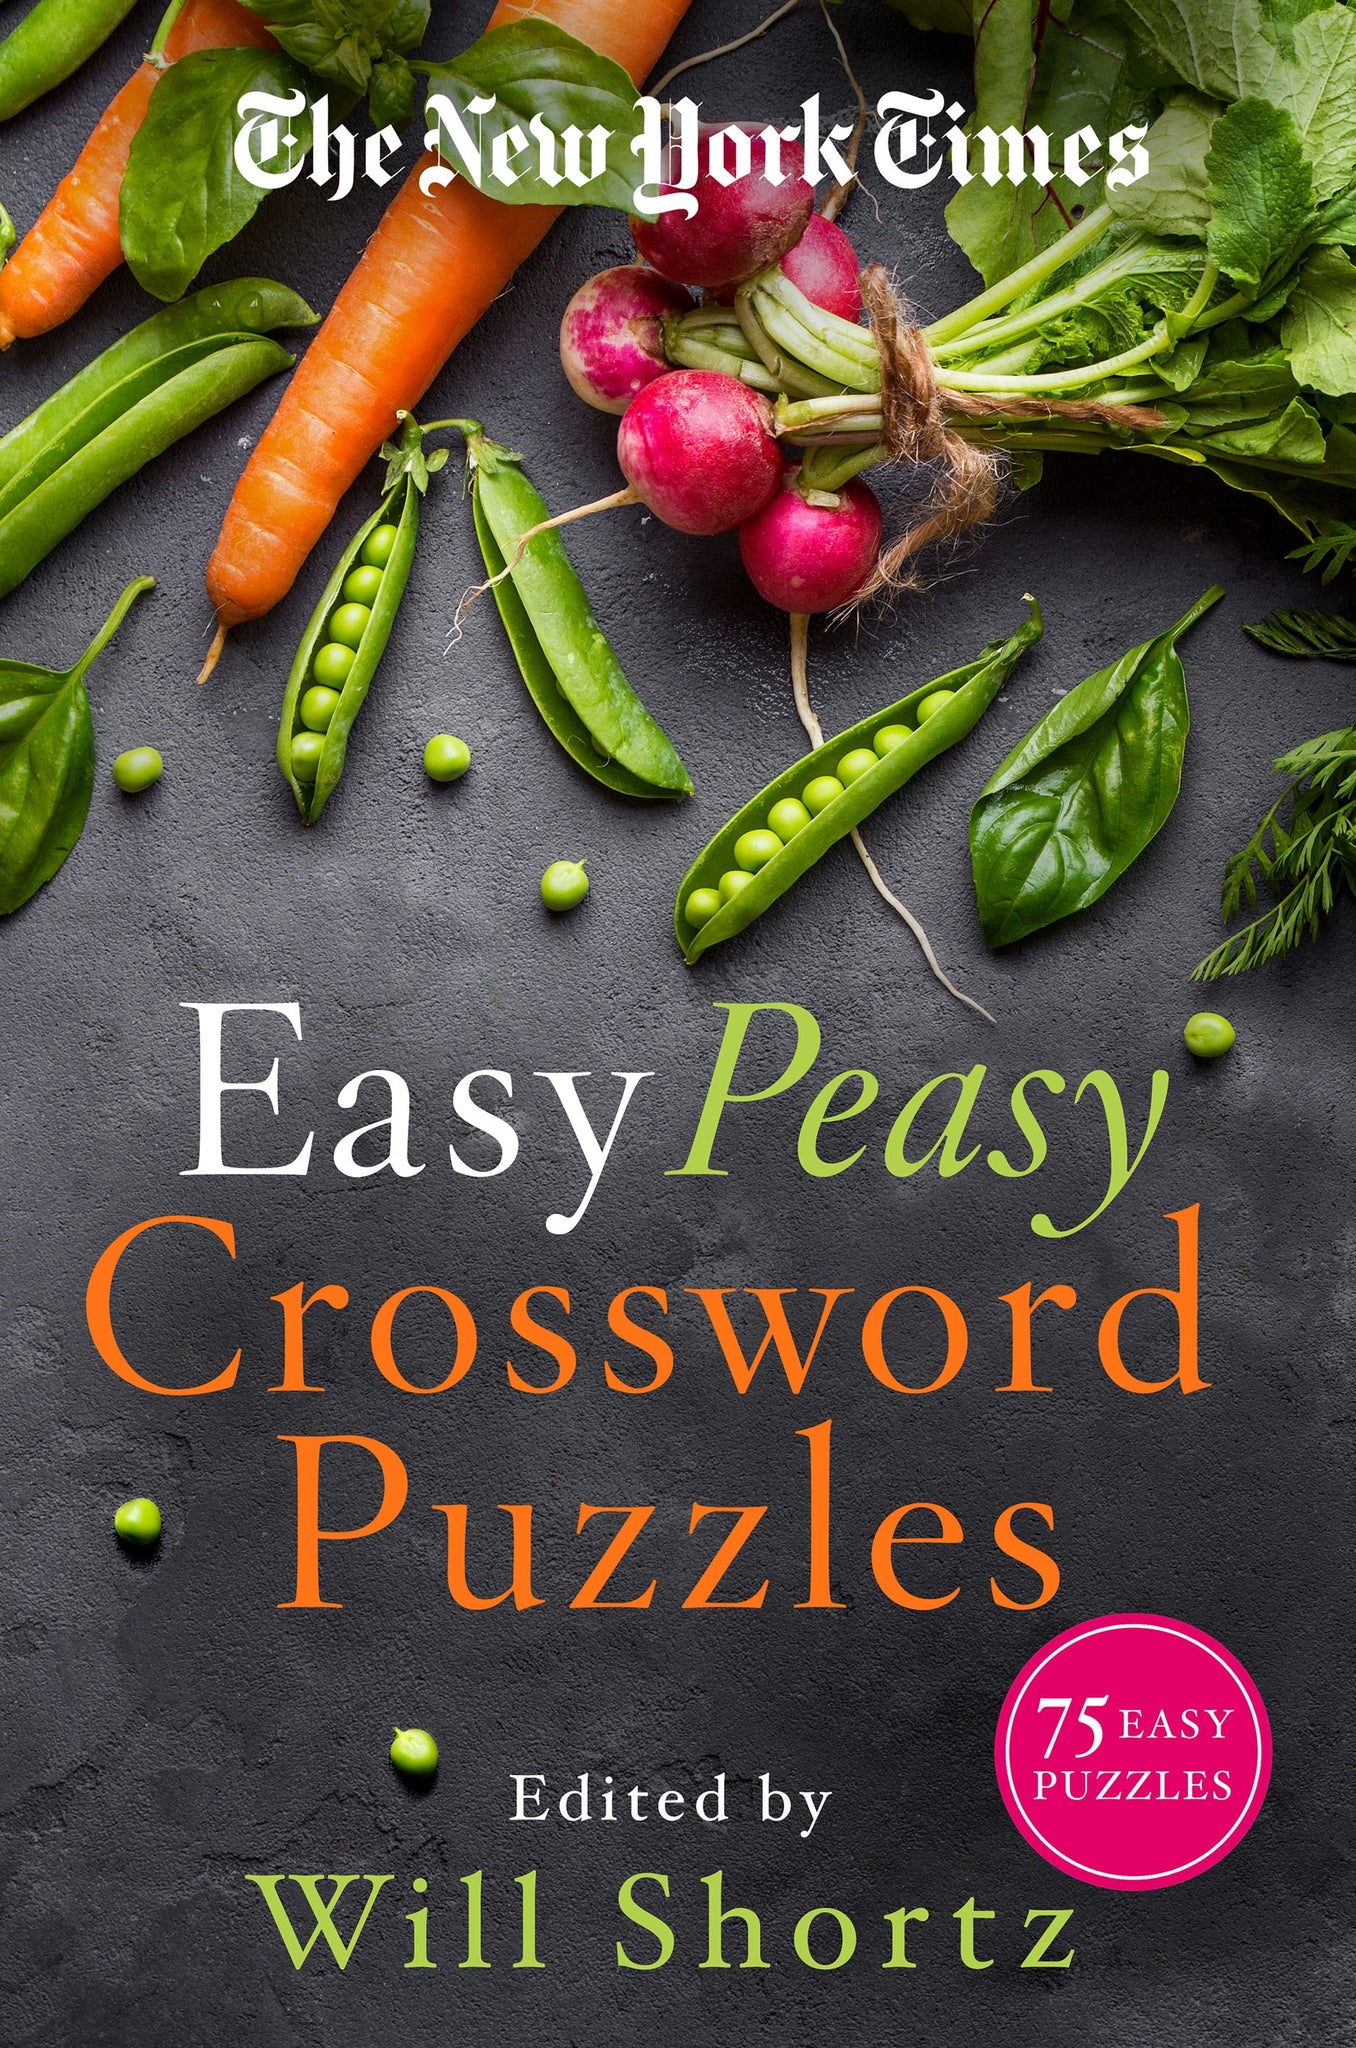 The New York Times Easy Peasy Crossword Puzzles : 75 Easy Puzzles